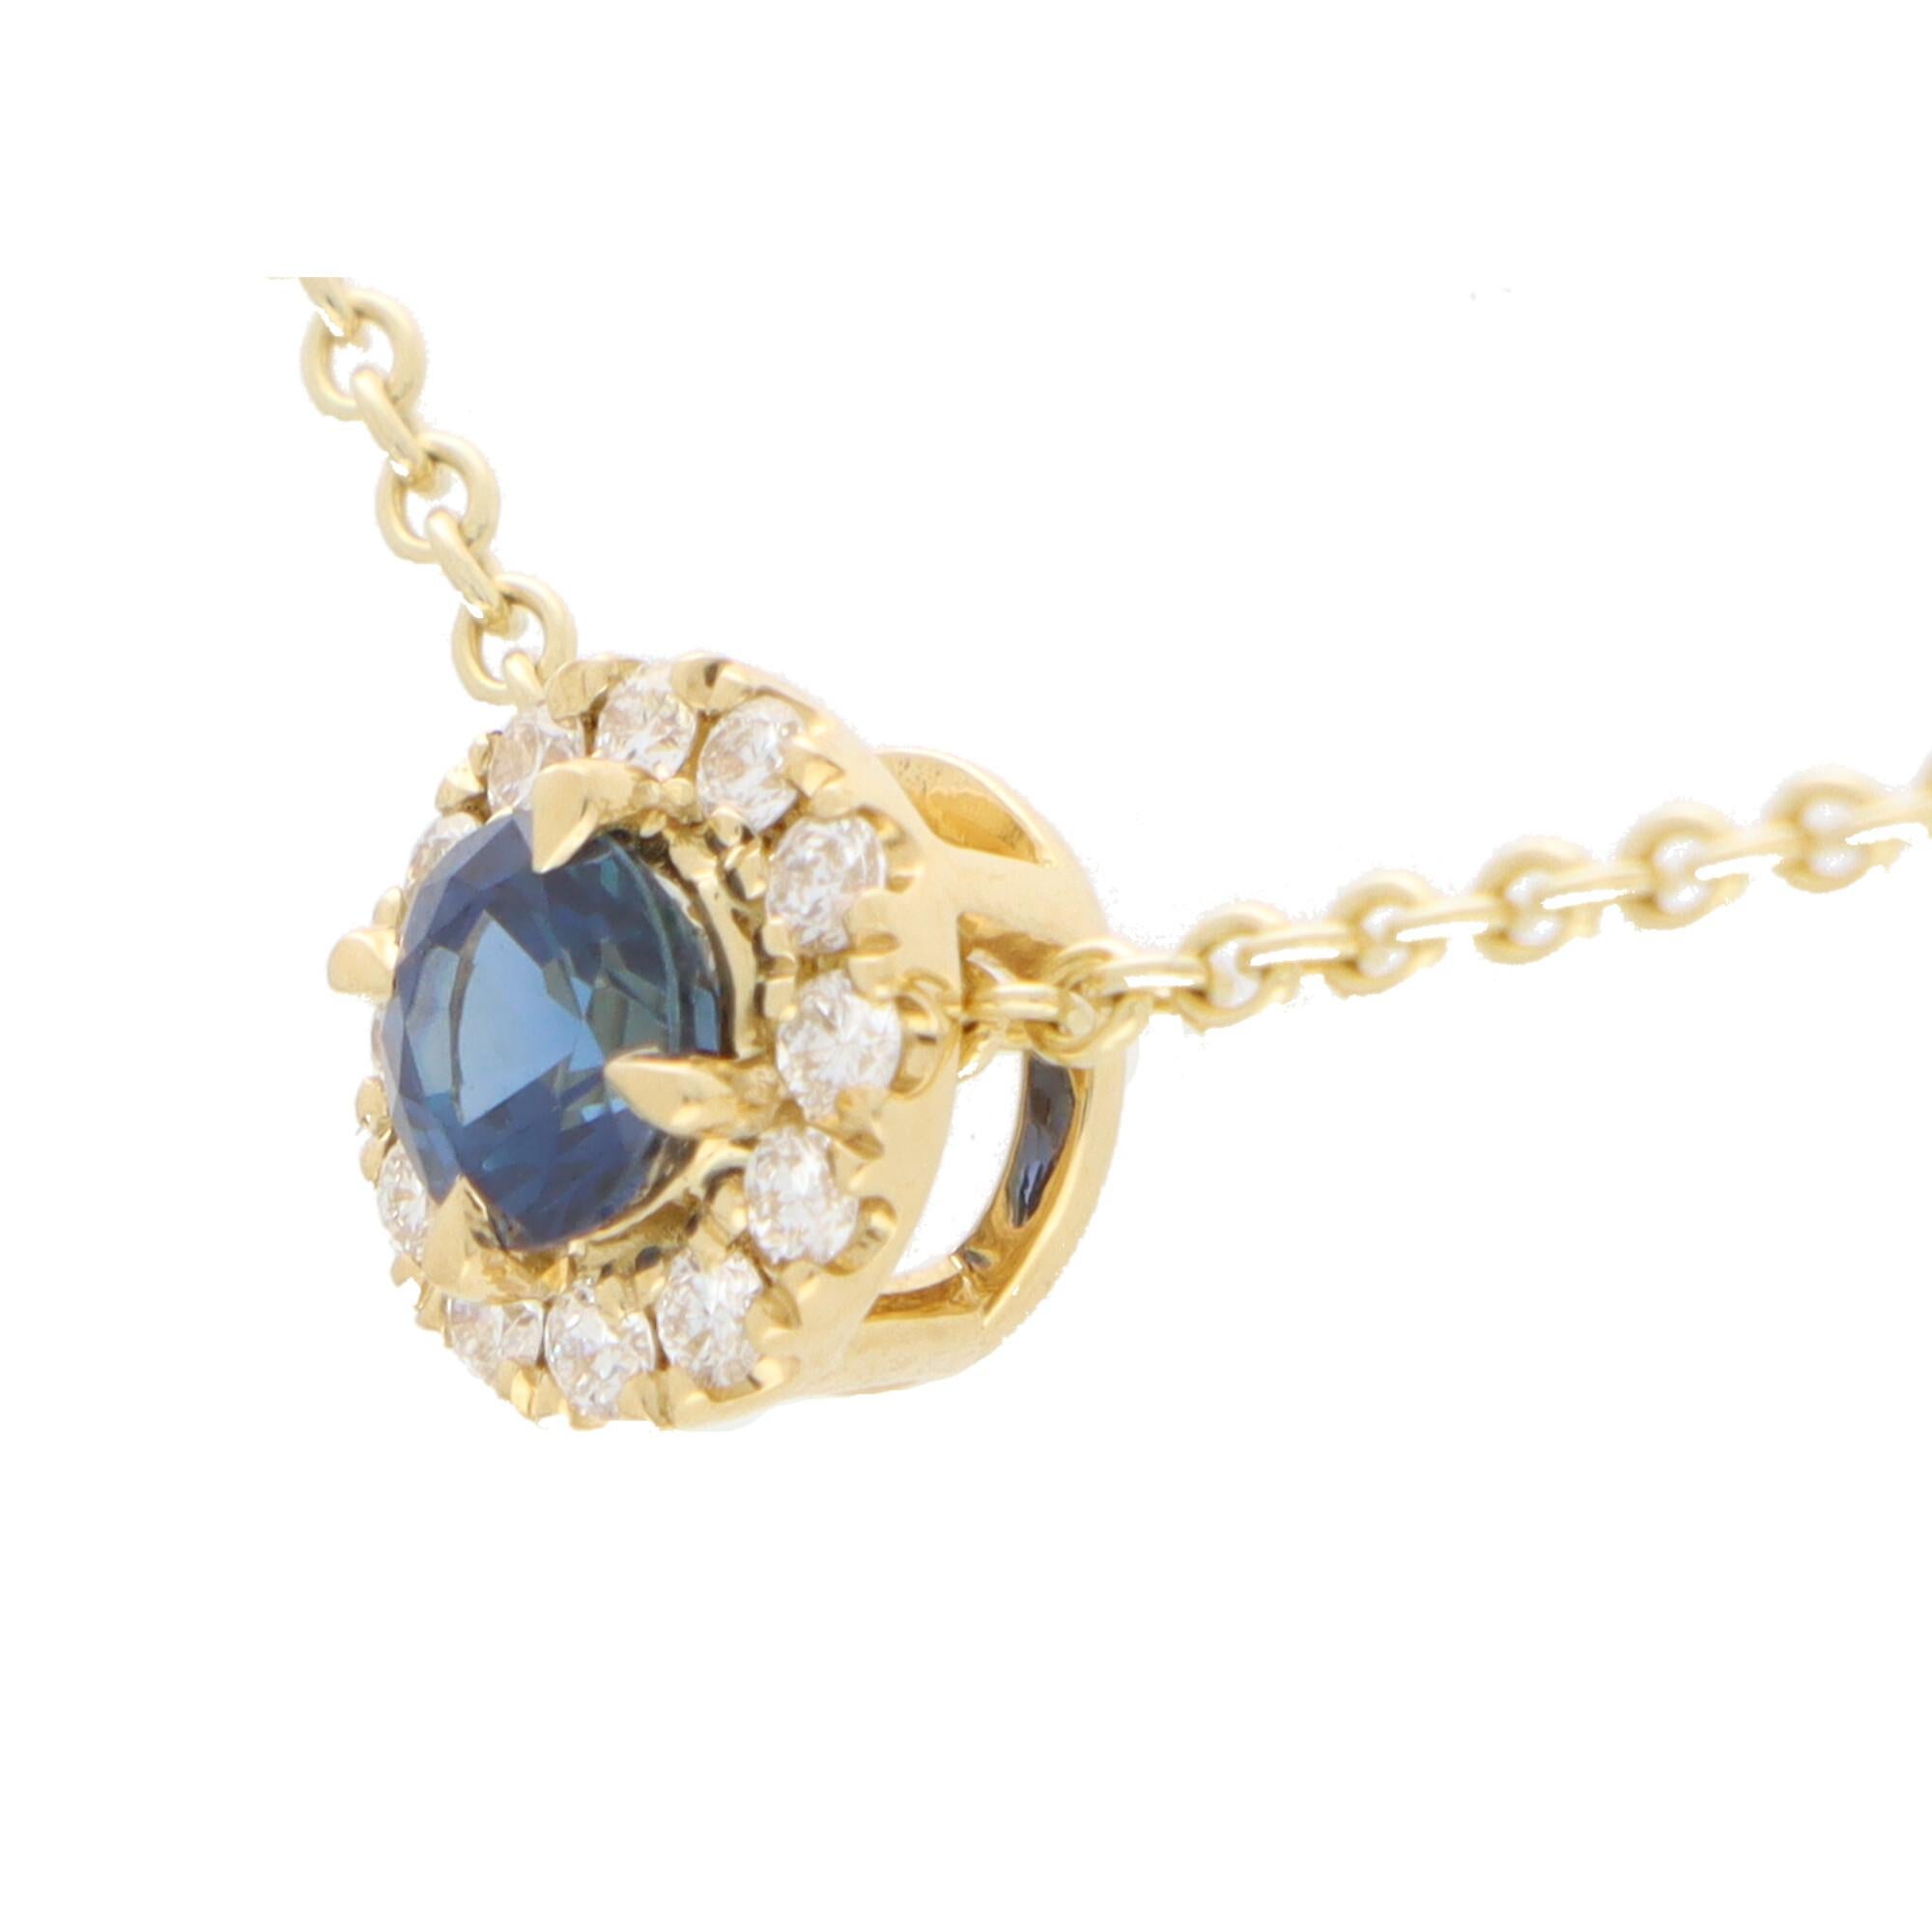 A beautiful sapphire and diamond cluster pendant set in 18k yellow gold.

The pendant is centrally set with a vibrant blue coloured round cut sapphire which is surrounded by 12 sparkly round brilliant cut diamonds. The pendant hangs from a 9k yellow